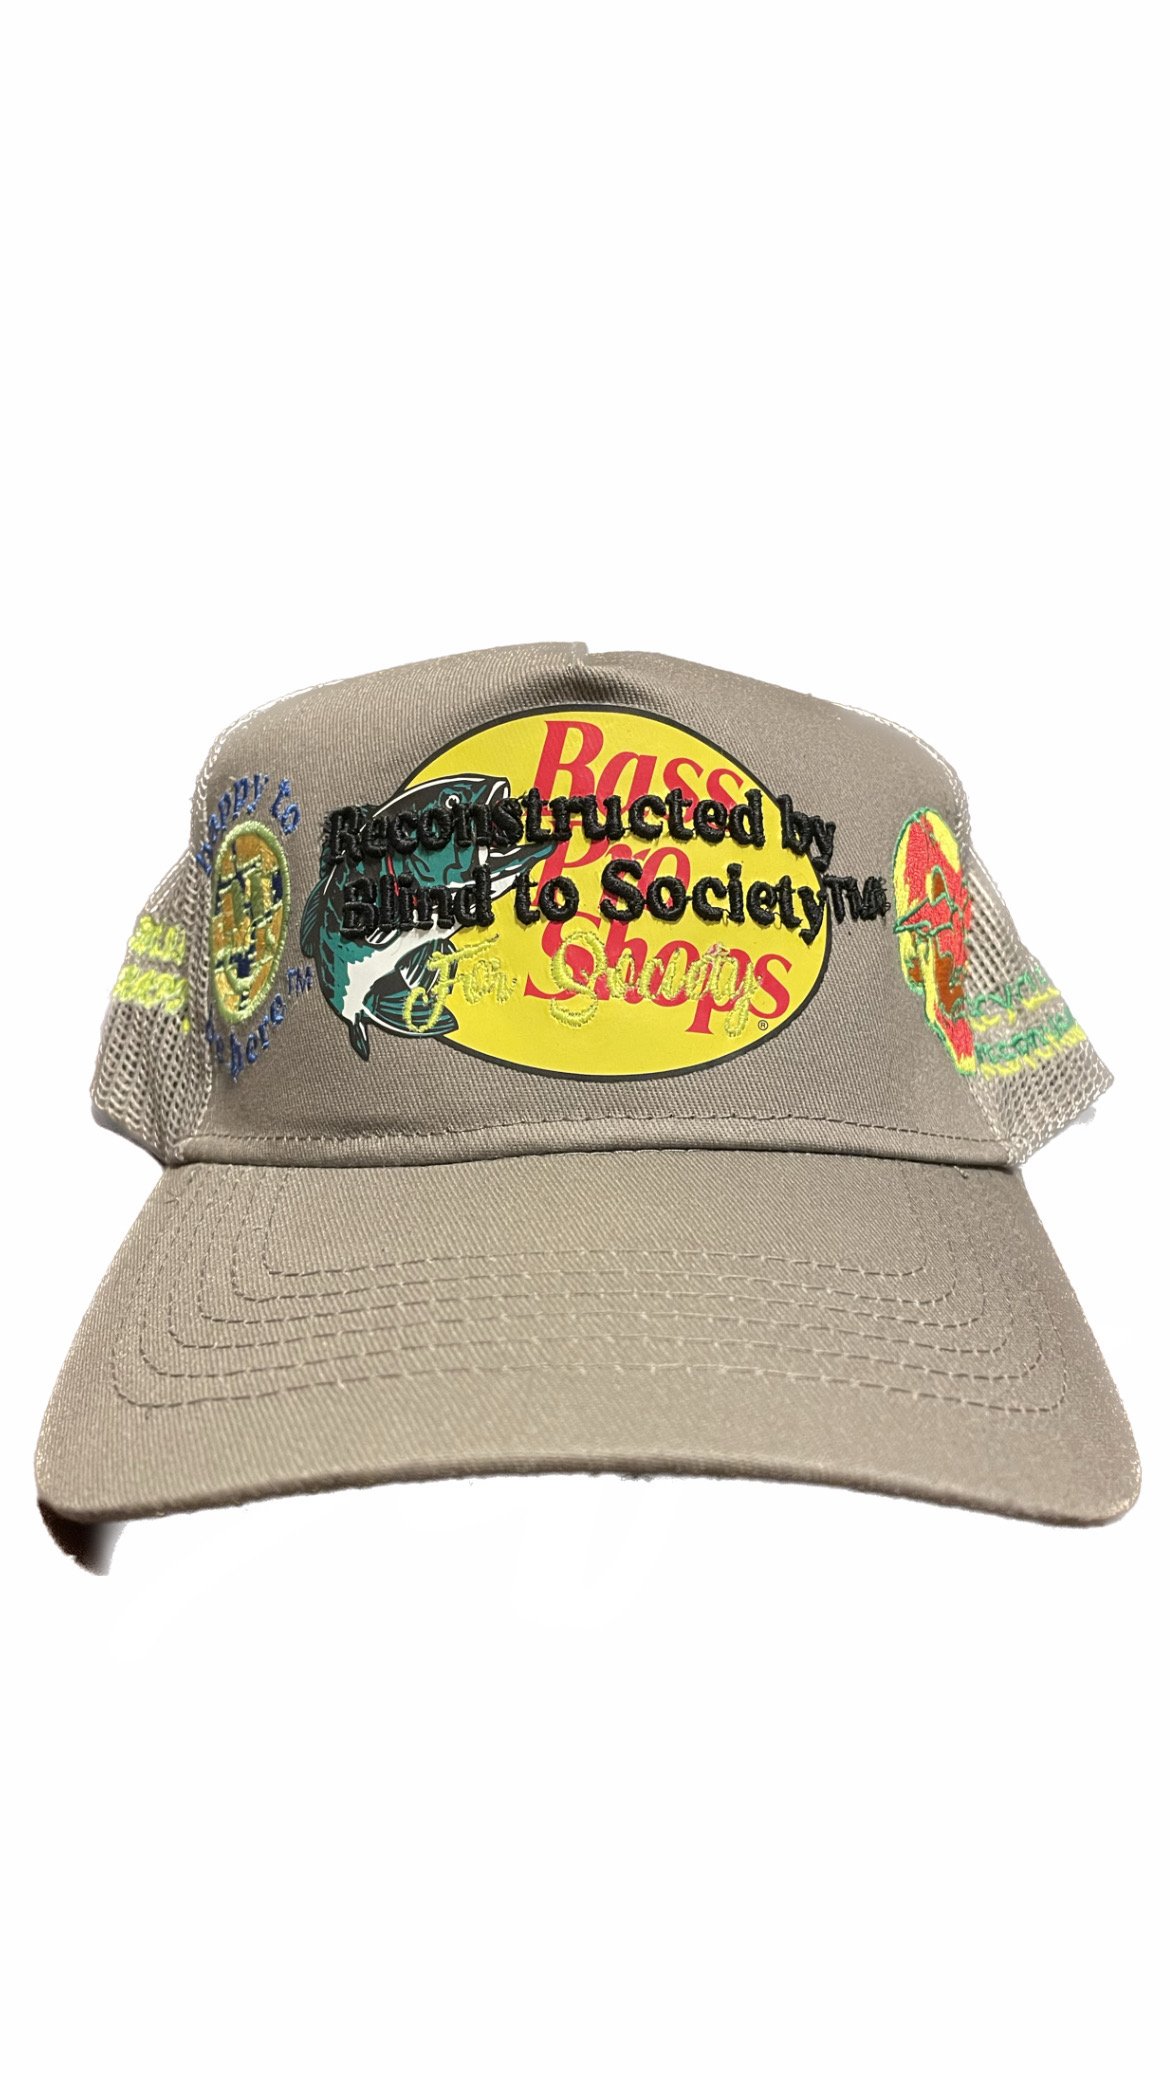 The enduring mystery of the Bass Pro Shops hat